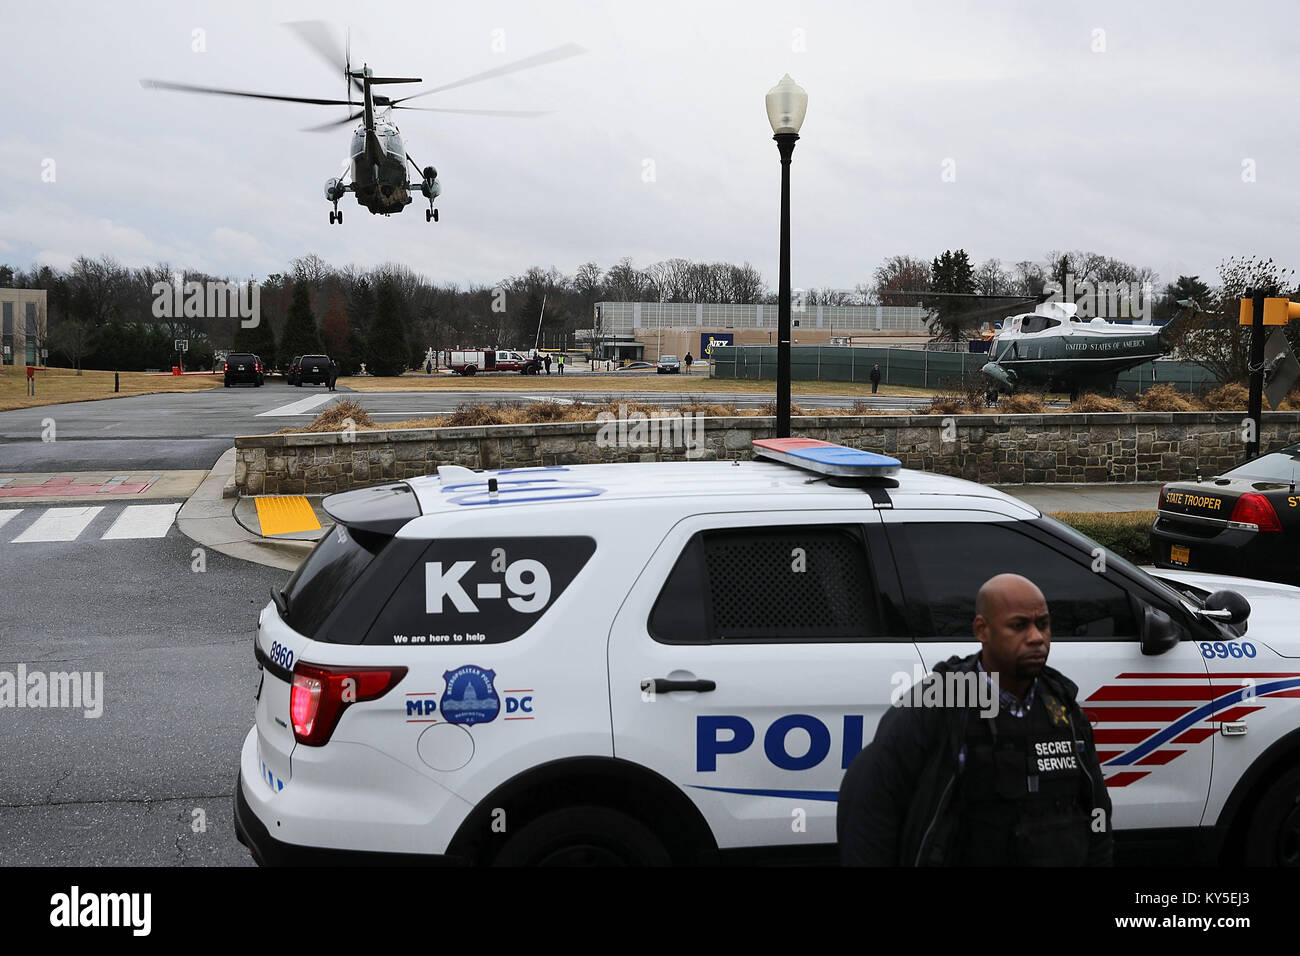 Bethesda, United States Of America. 12th Jan, 2018. With United States President Donald J. Trump on board, Marine One lifts off from Walter Reed National Military Medical Center following the president's annual physical examination January 12, 2018 in Bethesda, Maryland. Trump will next travel to Florida to spend the Dr. Martin Luther King Jr. Day holiday weekend at his Mar-a-Lago resort. Credit: Chip Somodevilla/Pool via CNP Photo via Credit: Newscom/Alamy Live News Stock Photo